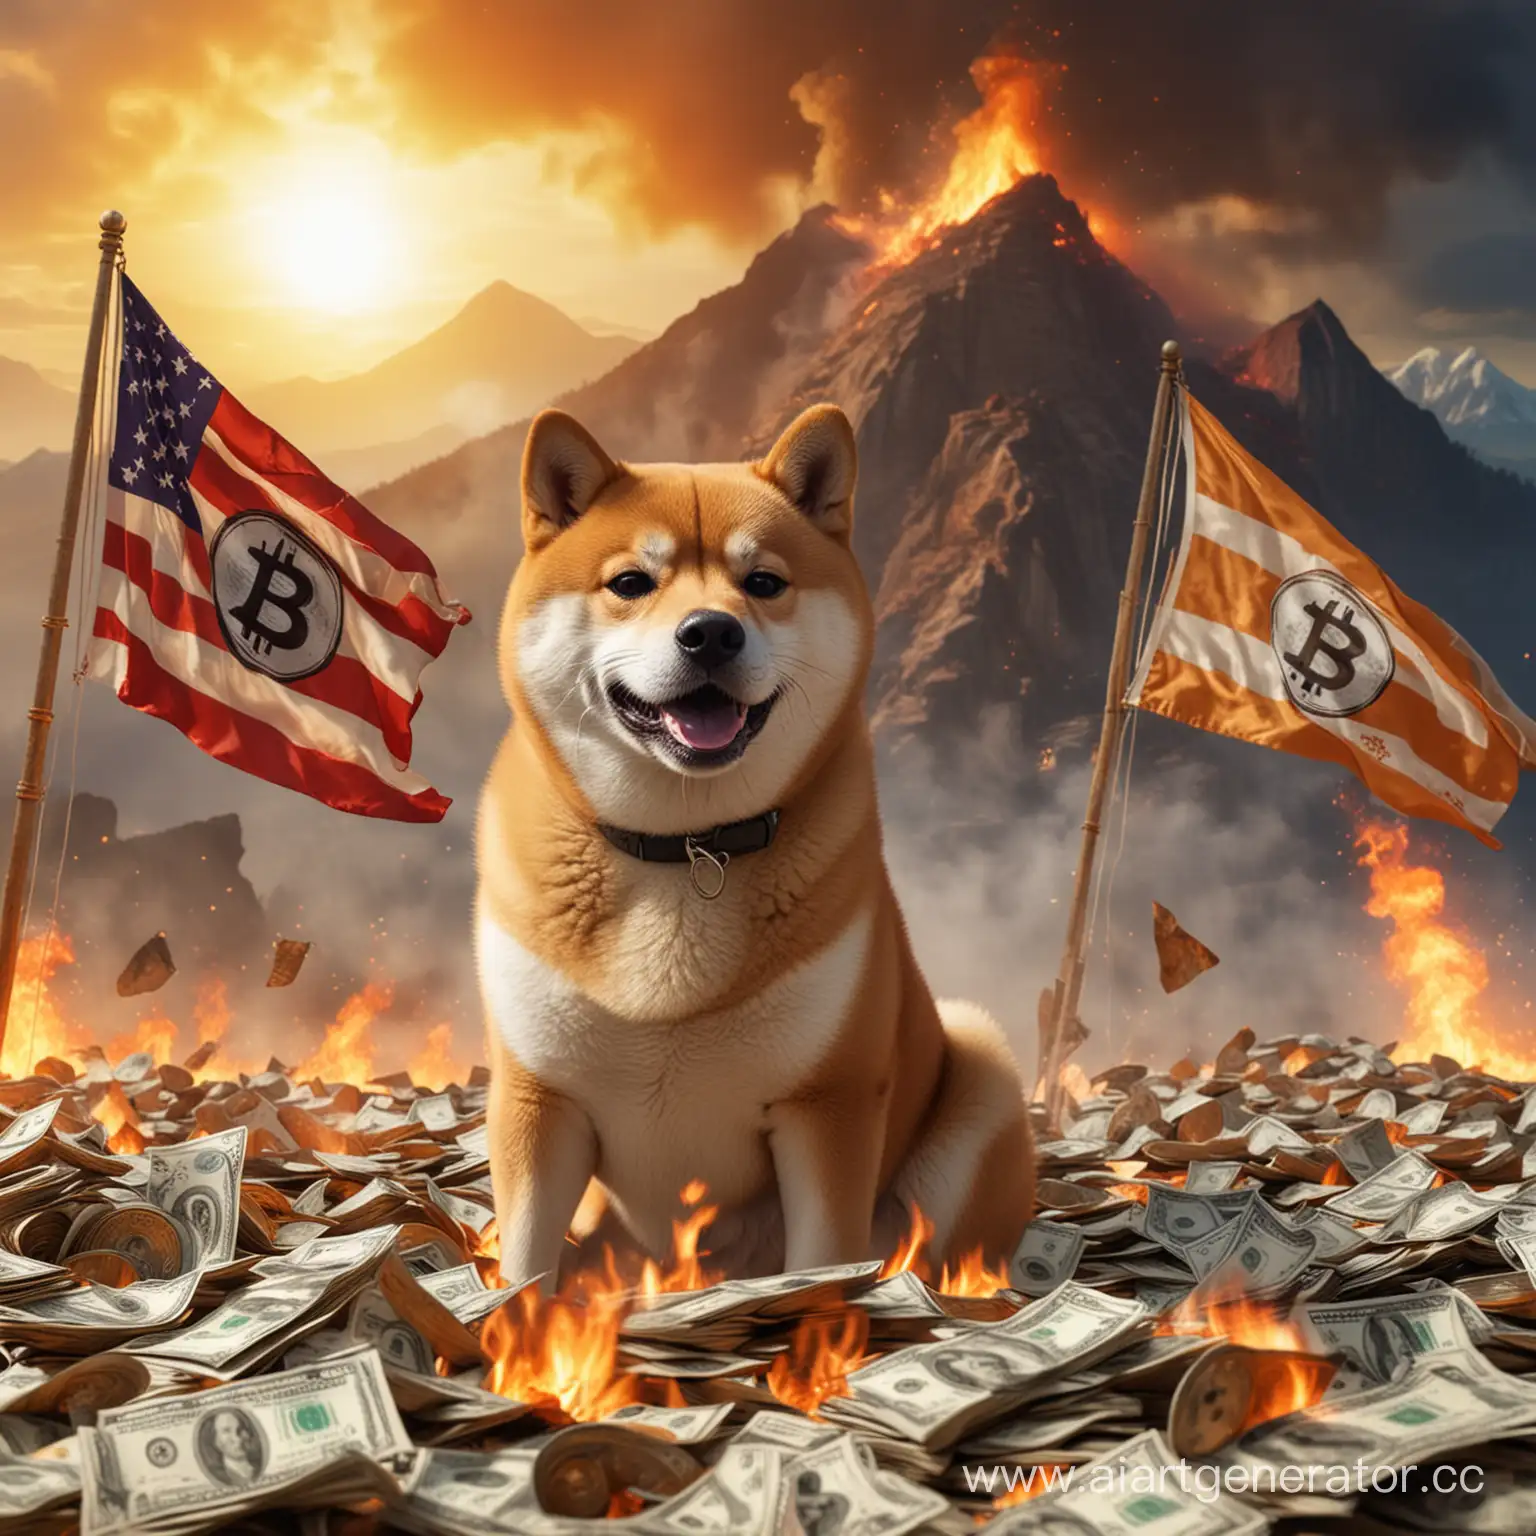 Shiba-Inu-Dog-with-Bitcoin-Flag-in-Front-of-Burning-Dollar-Mountain-Realistic-4K-Image